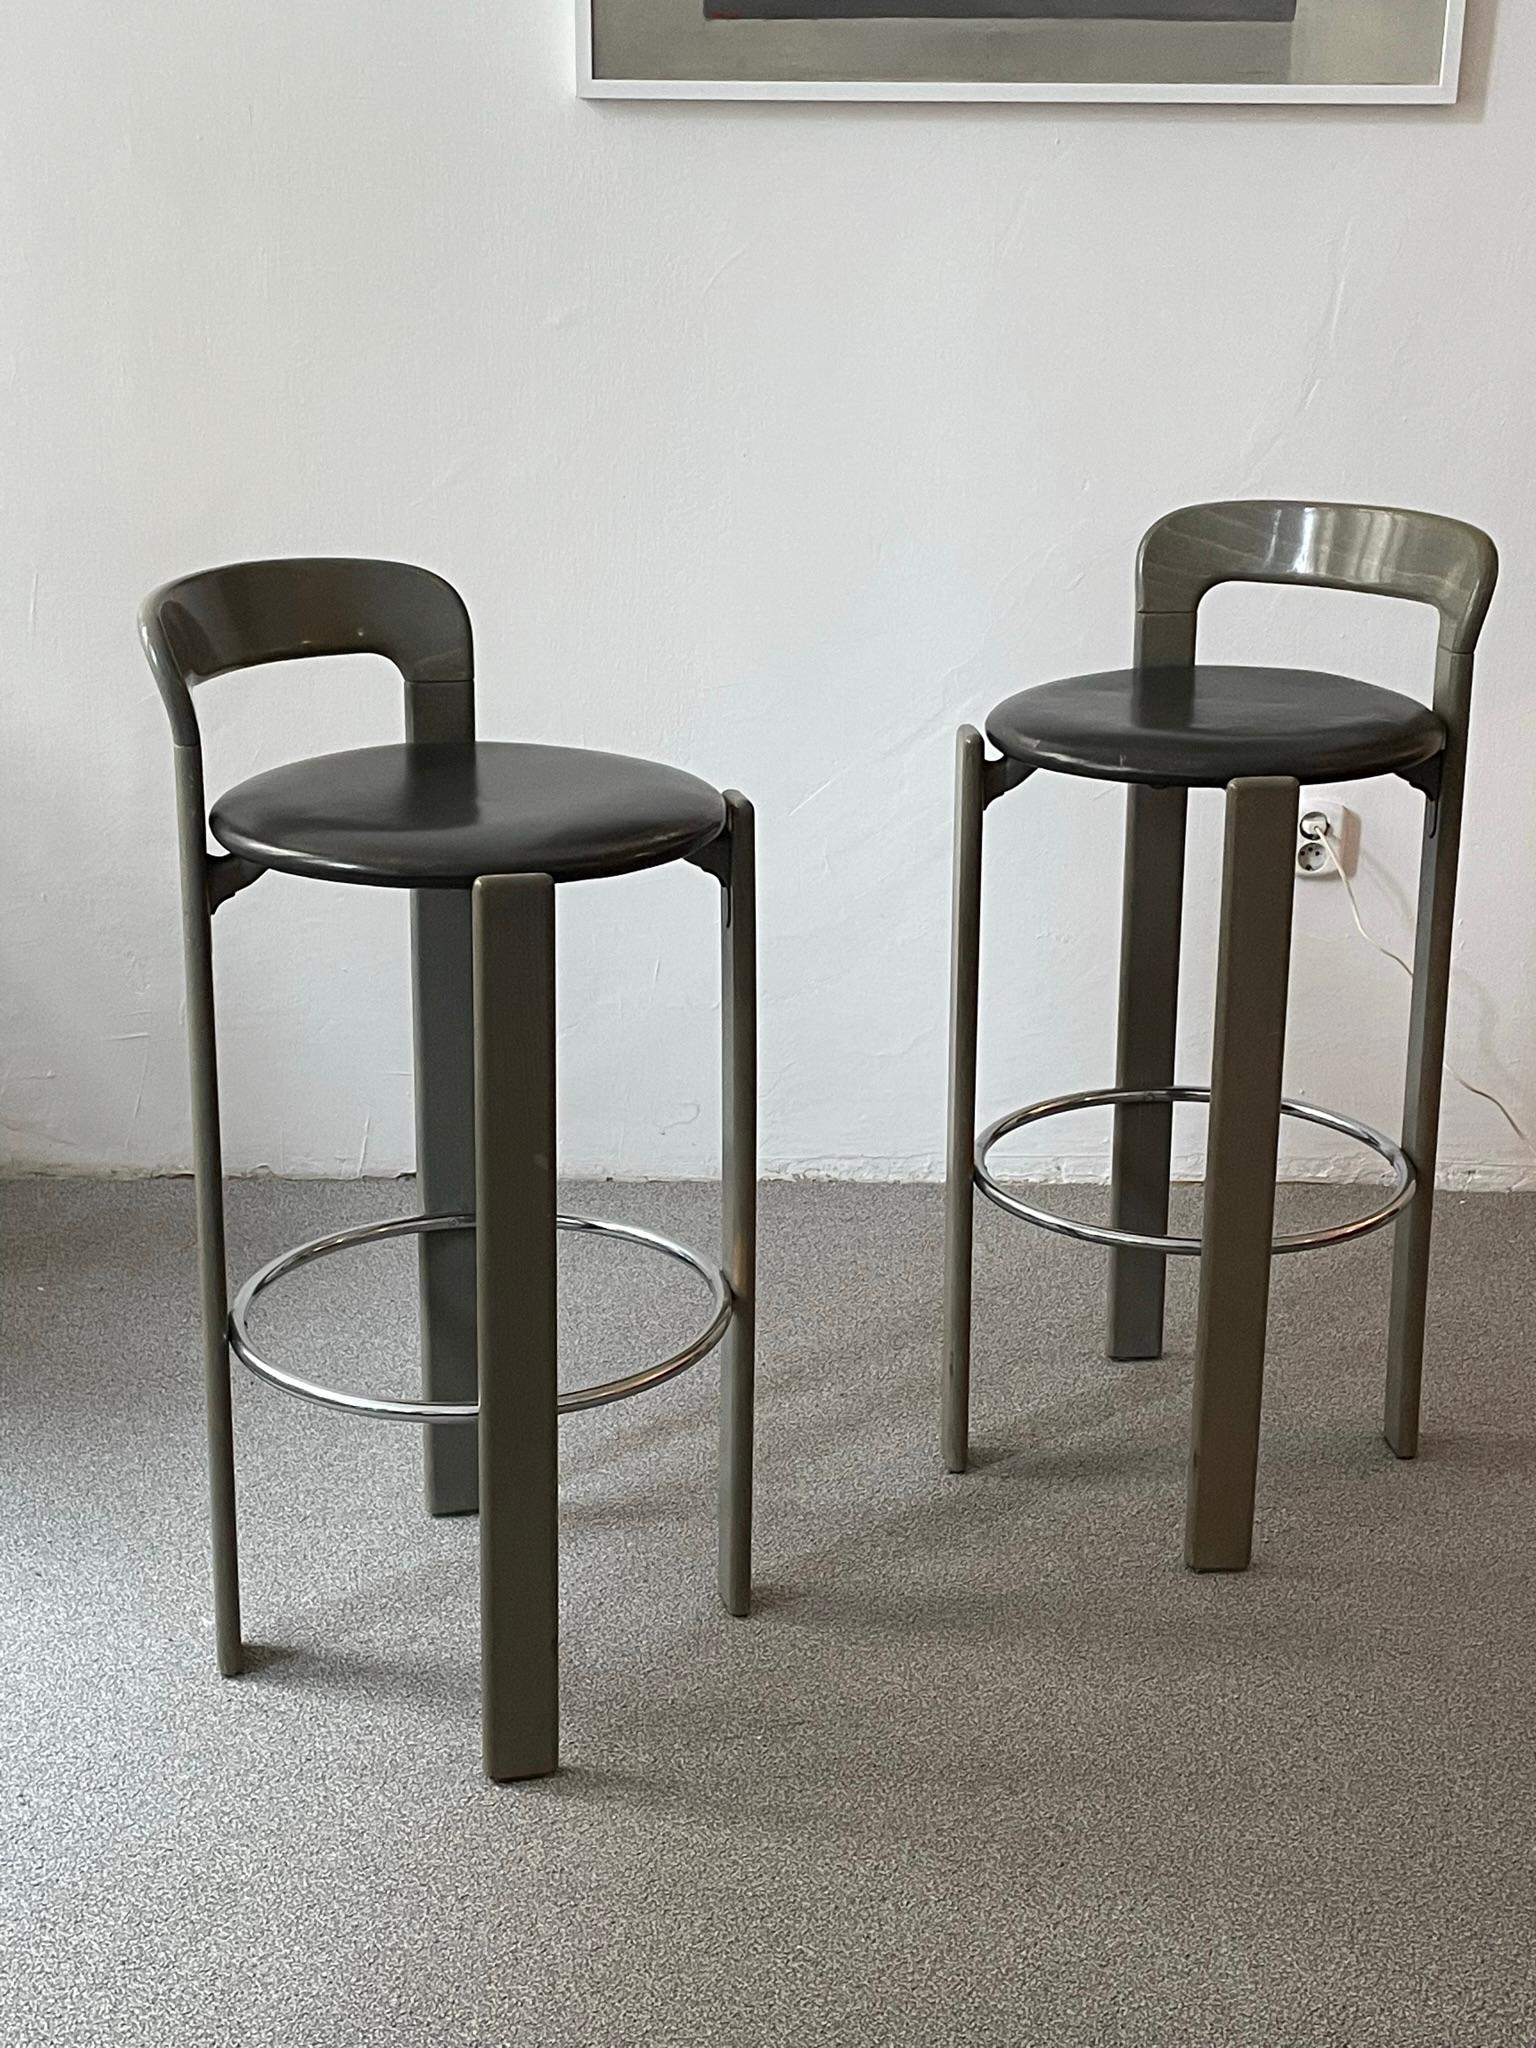 Bar stool by Bruno Rey for Dietiker.
 Made in Switzerland
The bar stool have a solid wooden frame with curved backrests. Covered in leather
 In good vintage condition, very strong and sturdy.
 Have some minor marks commensurate with age and